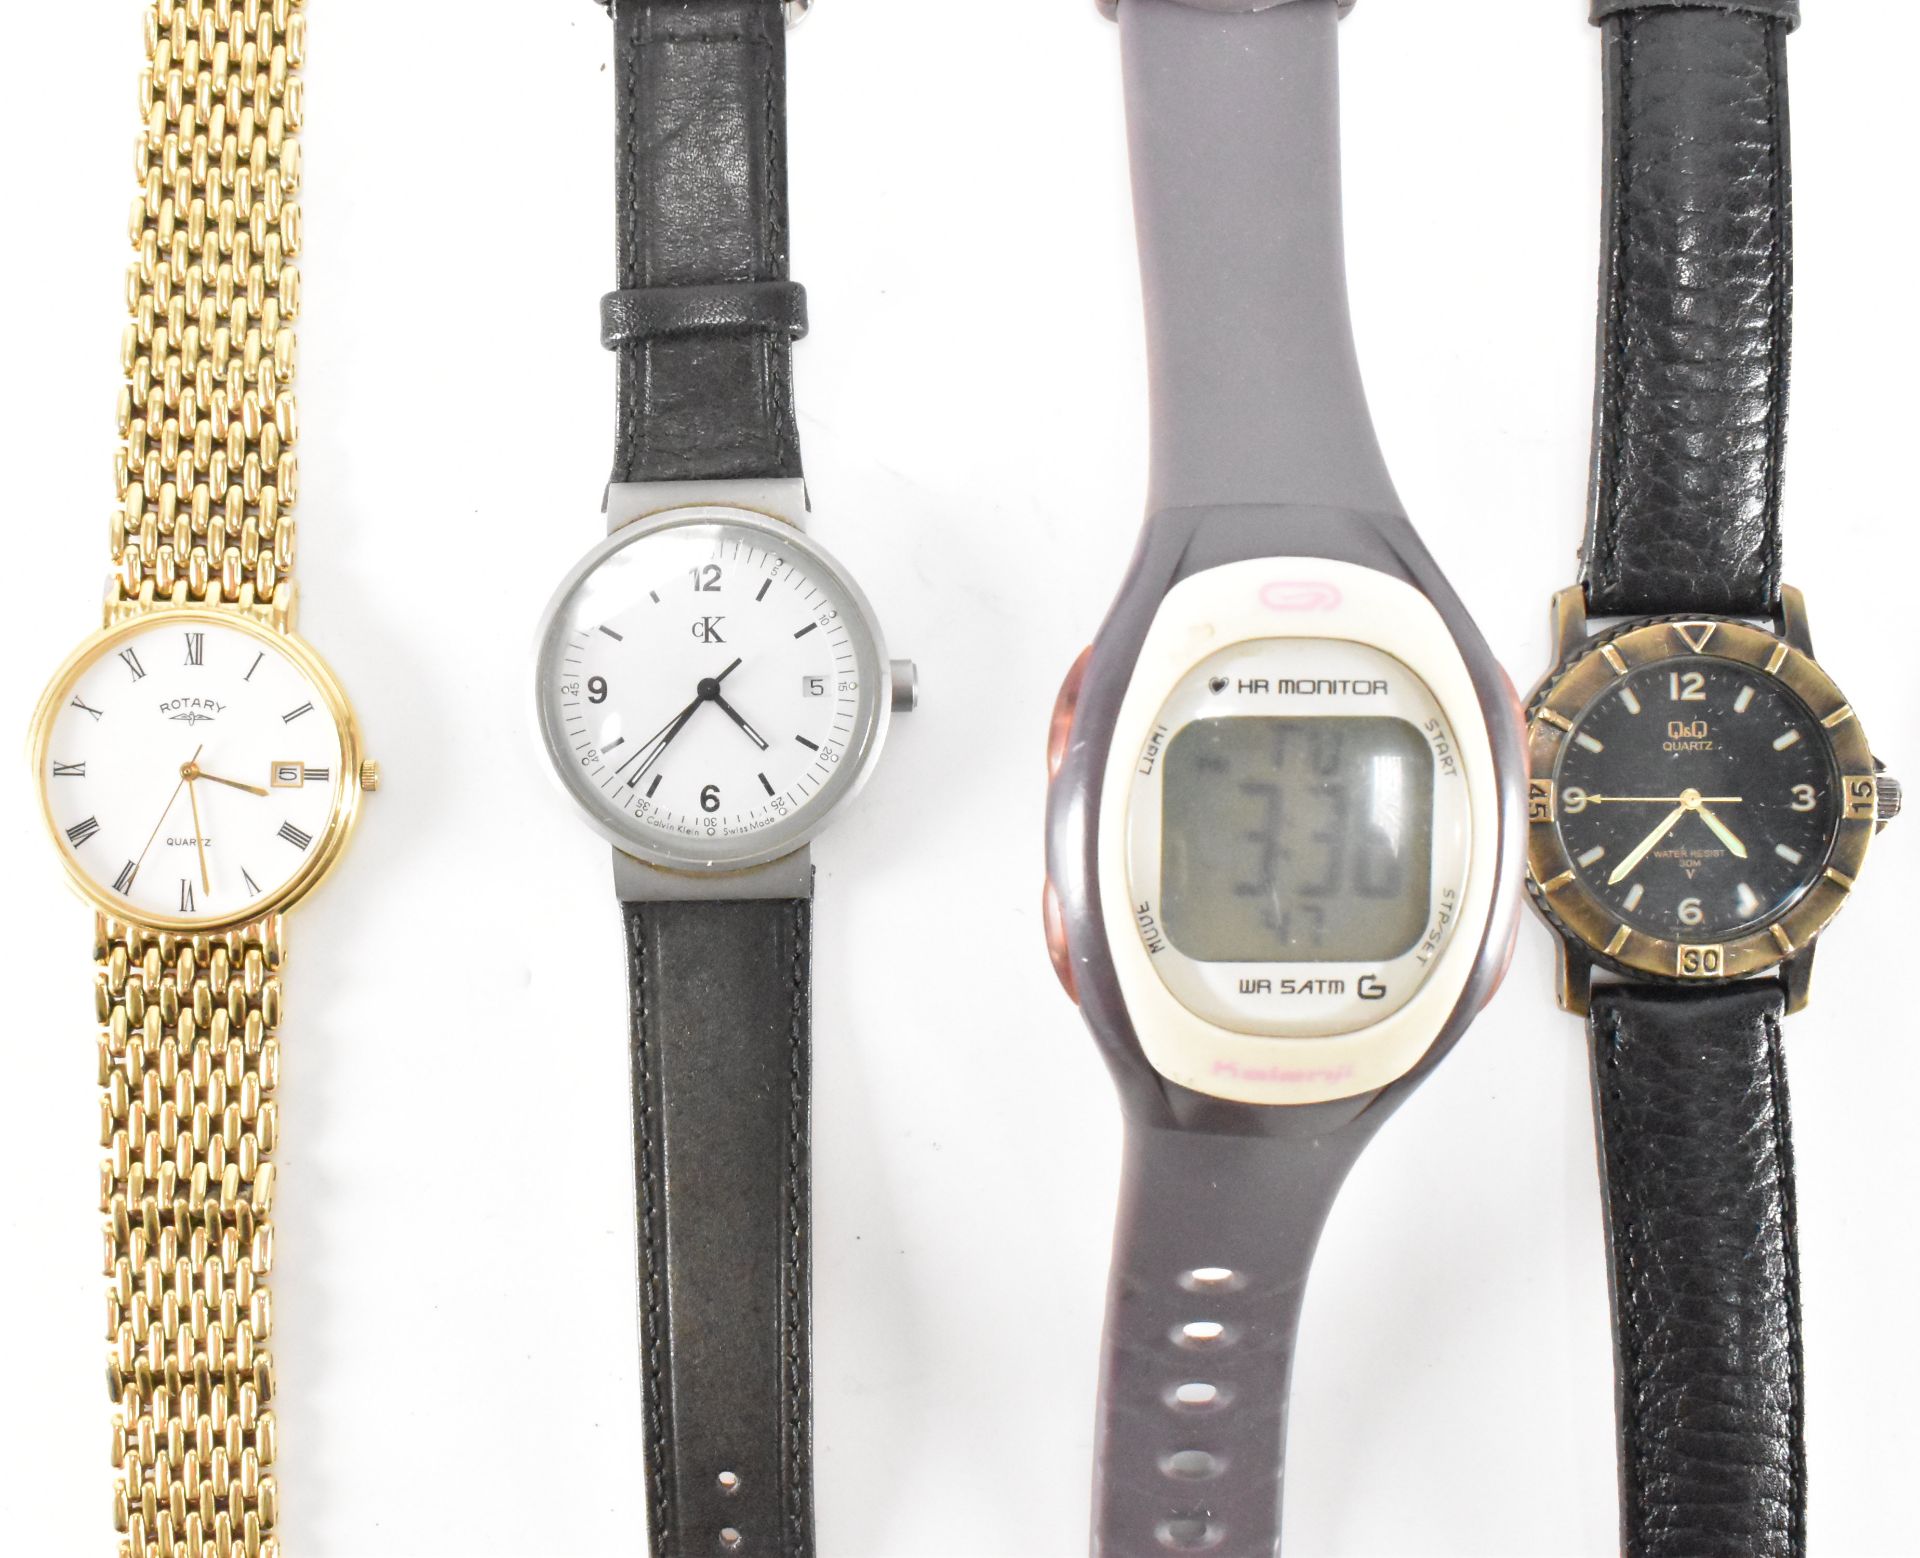 ASSORTMENT OF VARIOUS WRIST WATCHES - Image 3 of 7